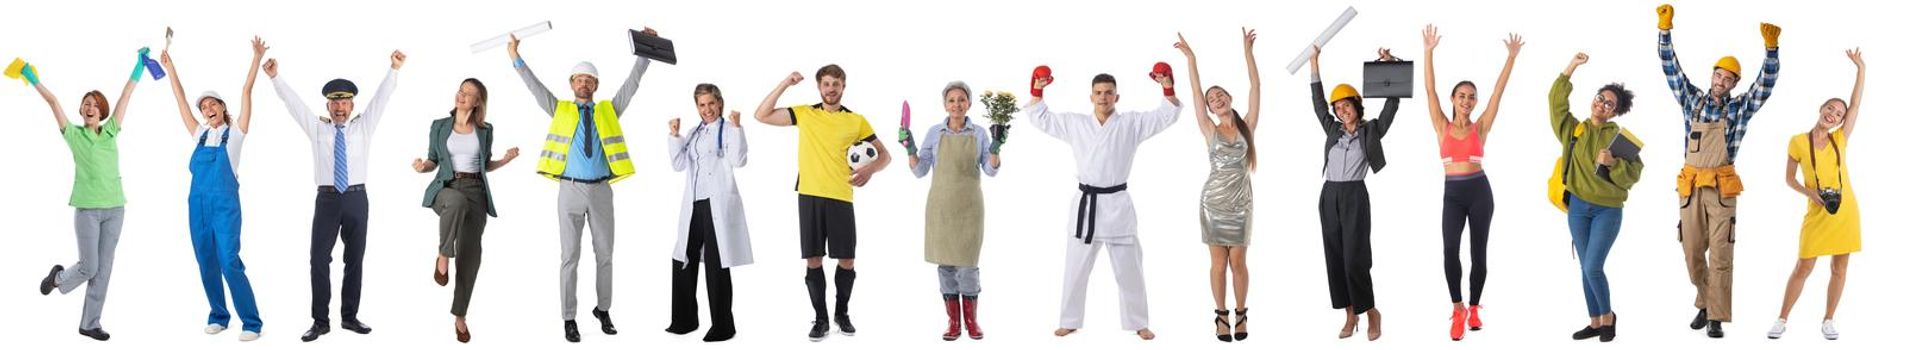 Set collage image of profession different workers with raised arms isolated over white background, full length portrait